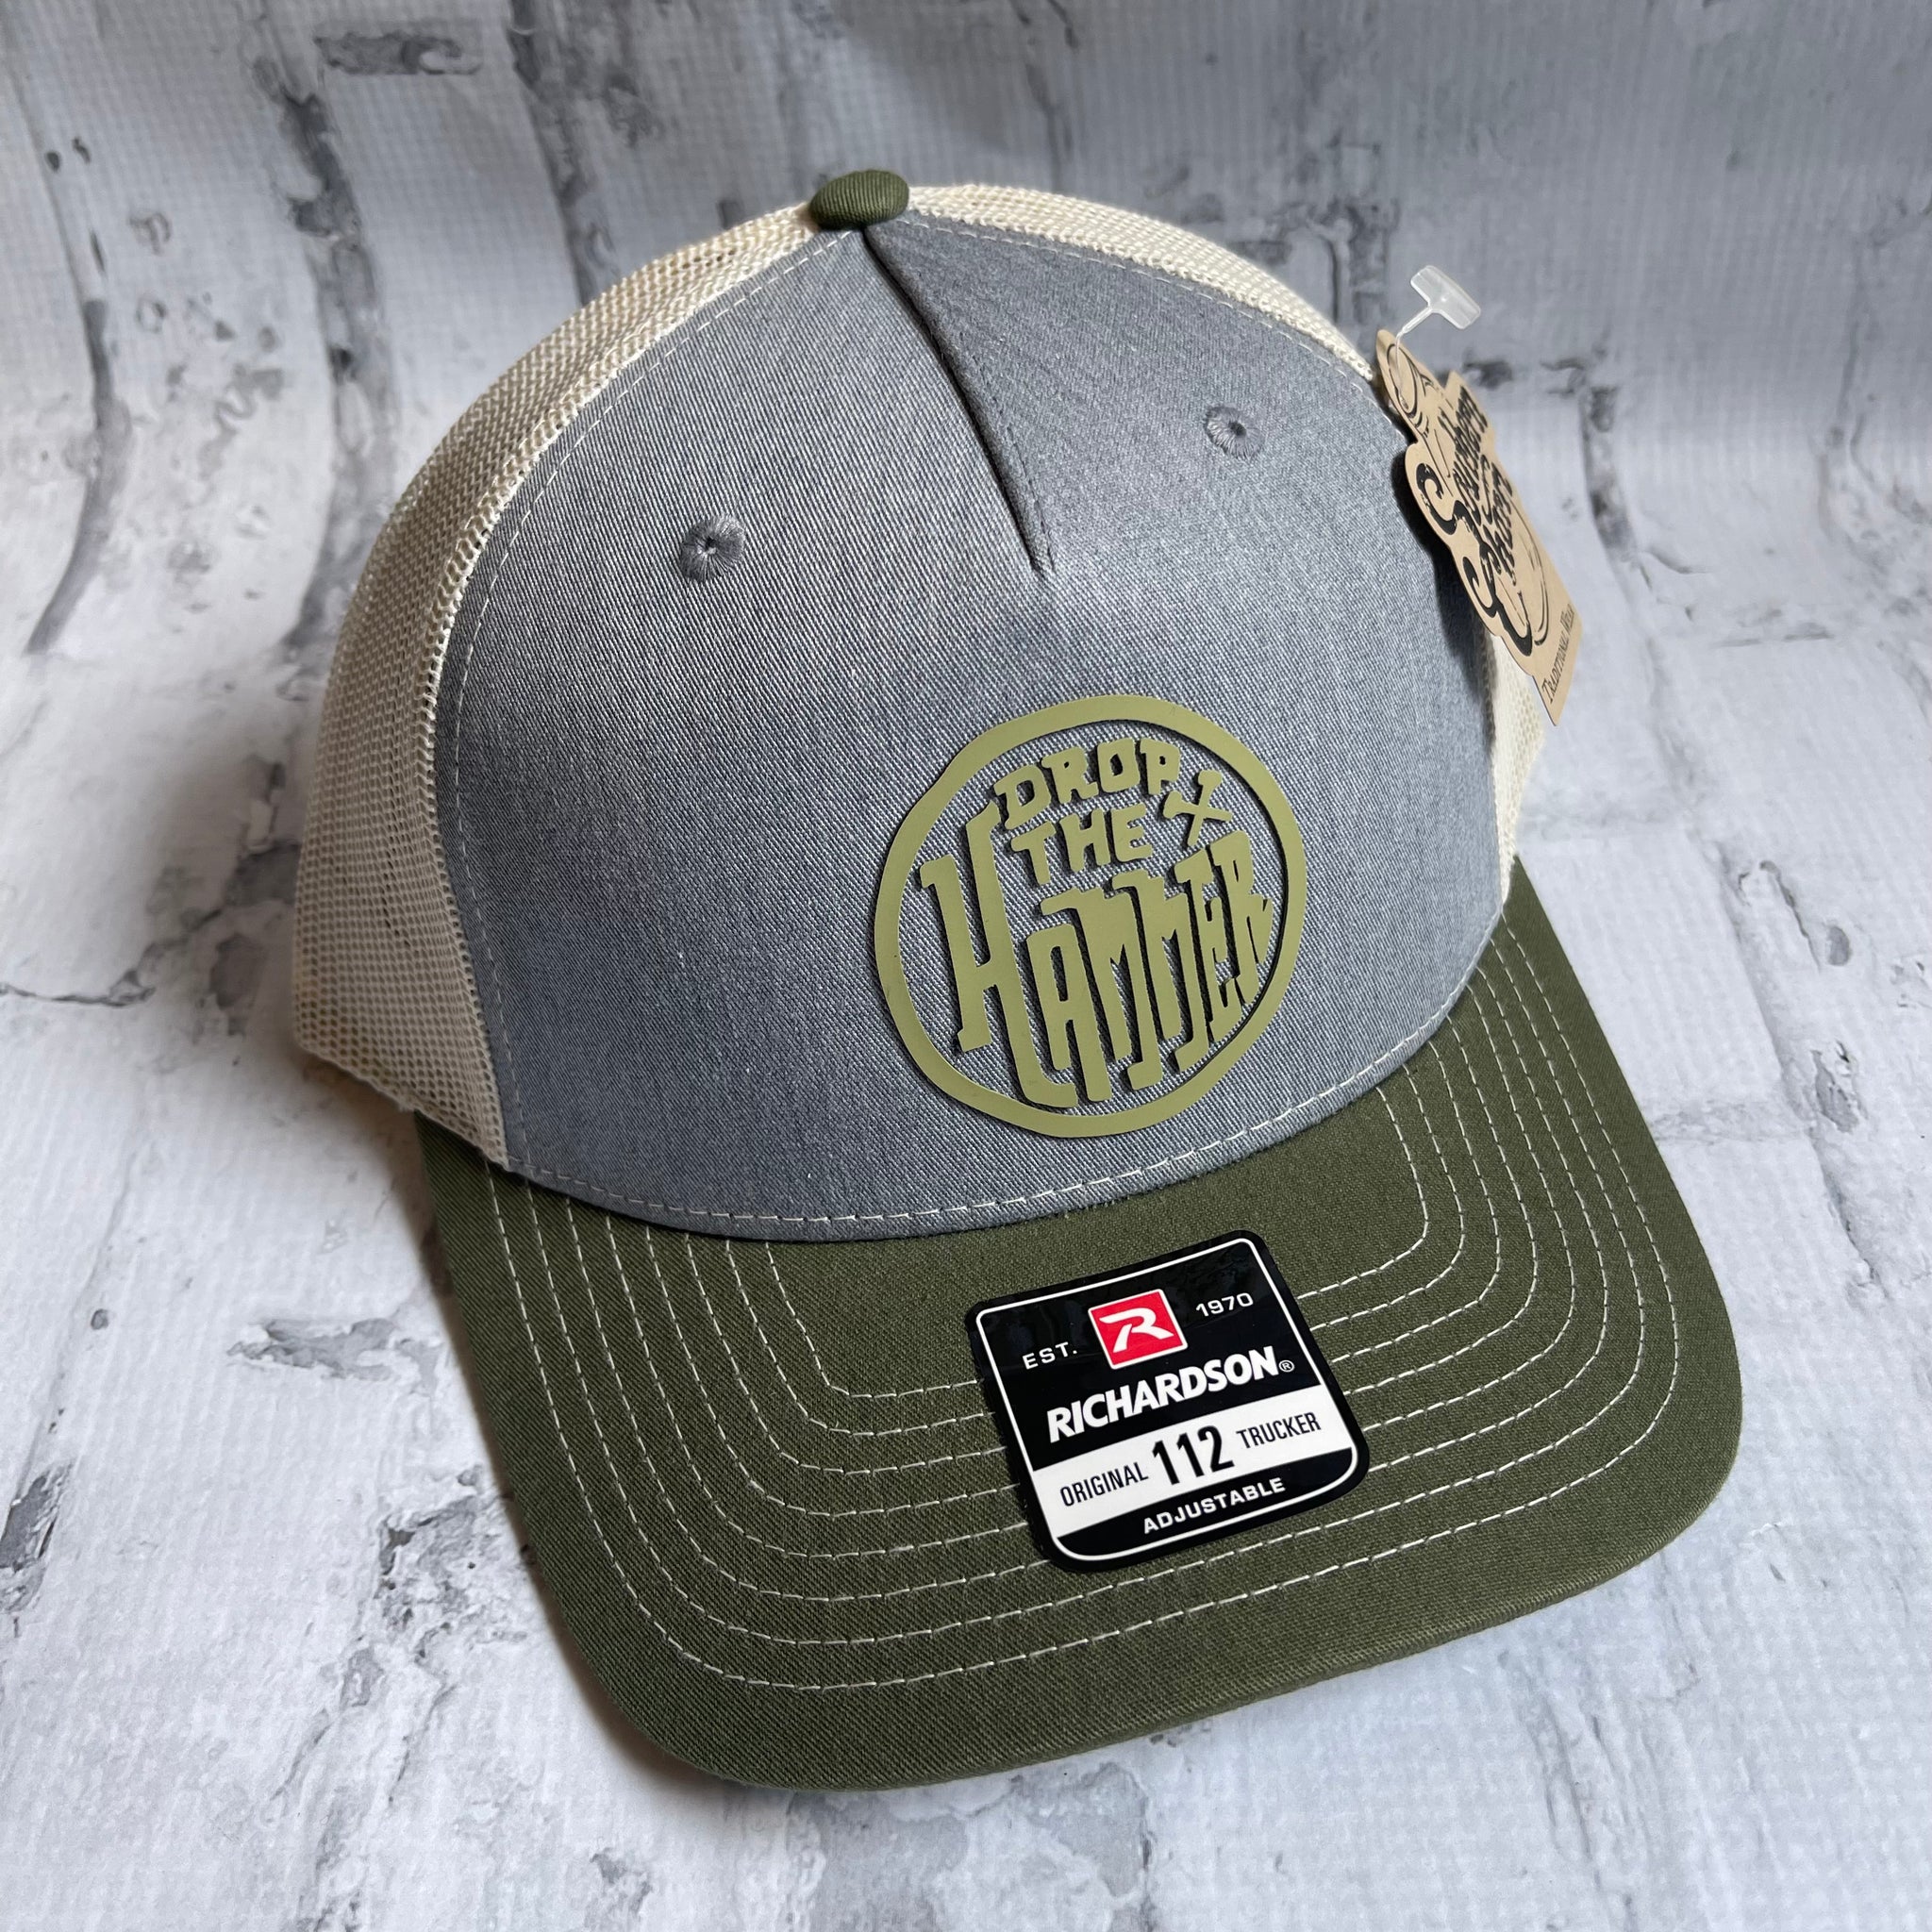 Hammer Down "90s Surf DTH" Hat - Heather Gray and Olive with Rubber Patch - Southern Charm "Shop The Charm"